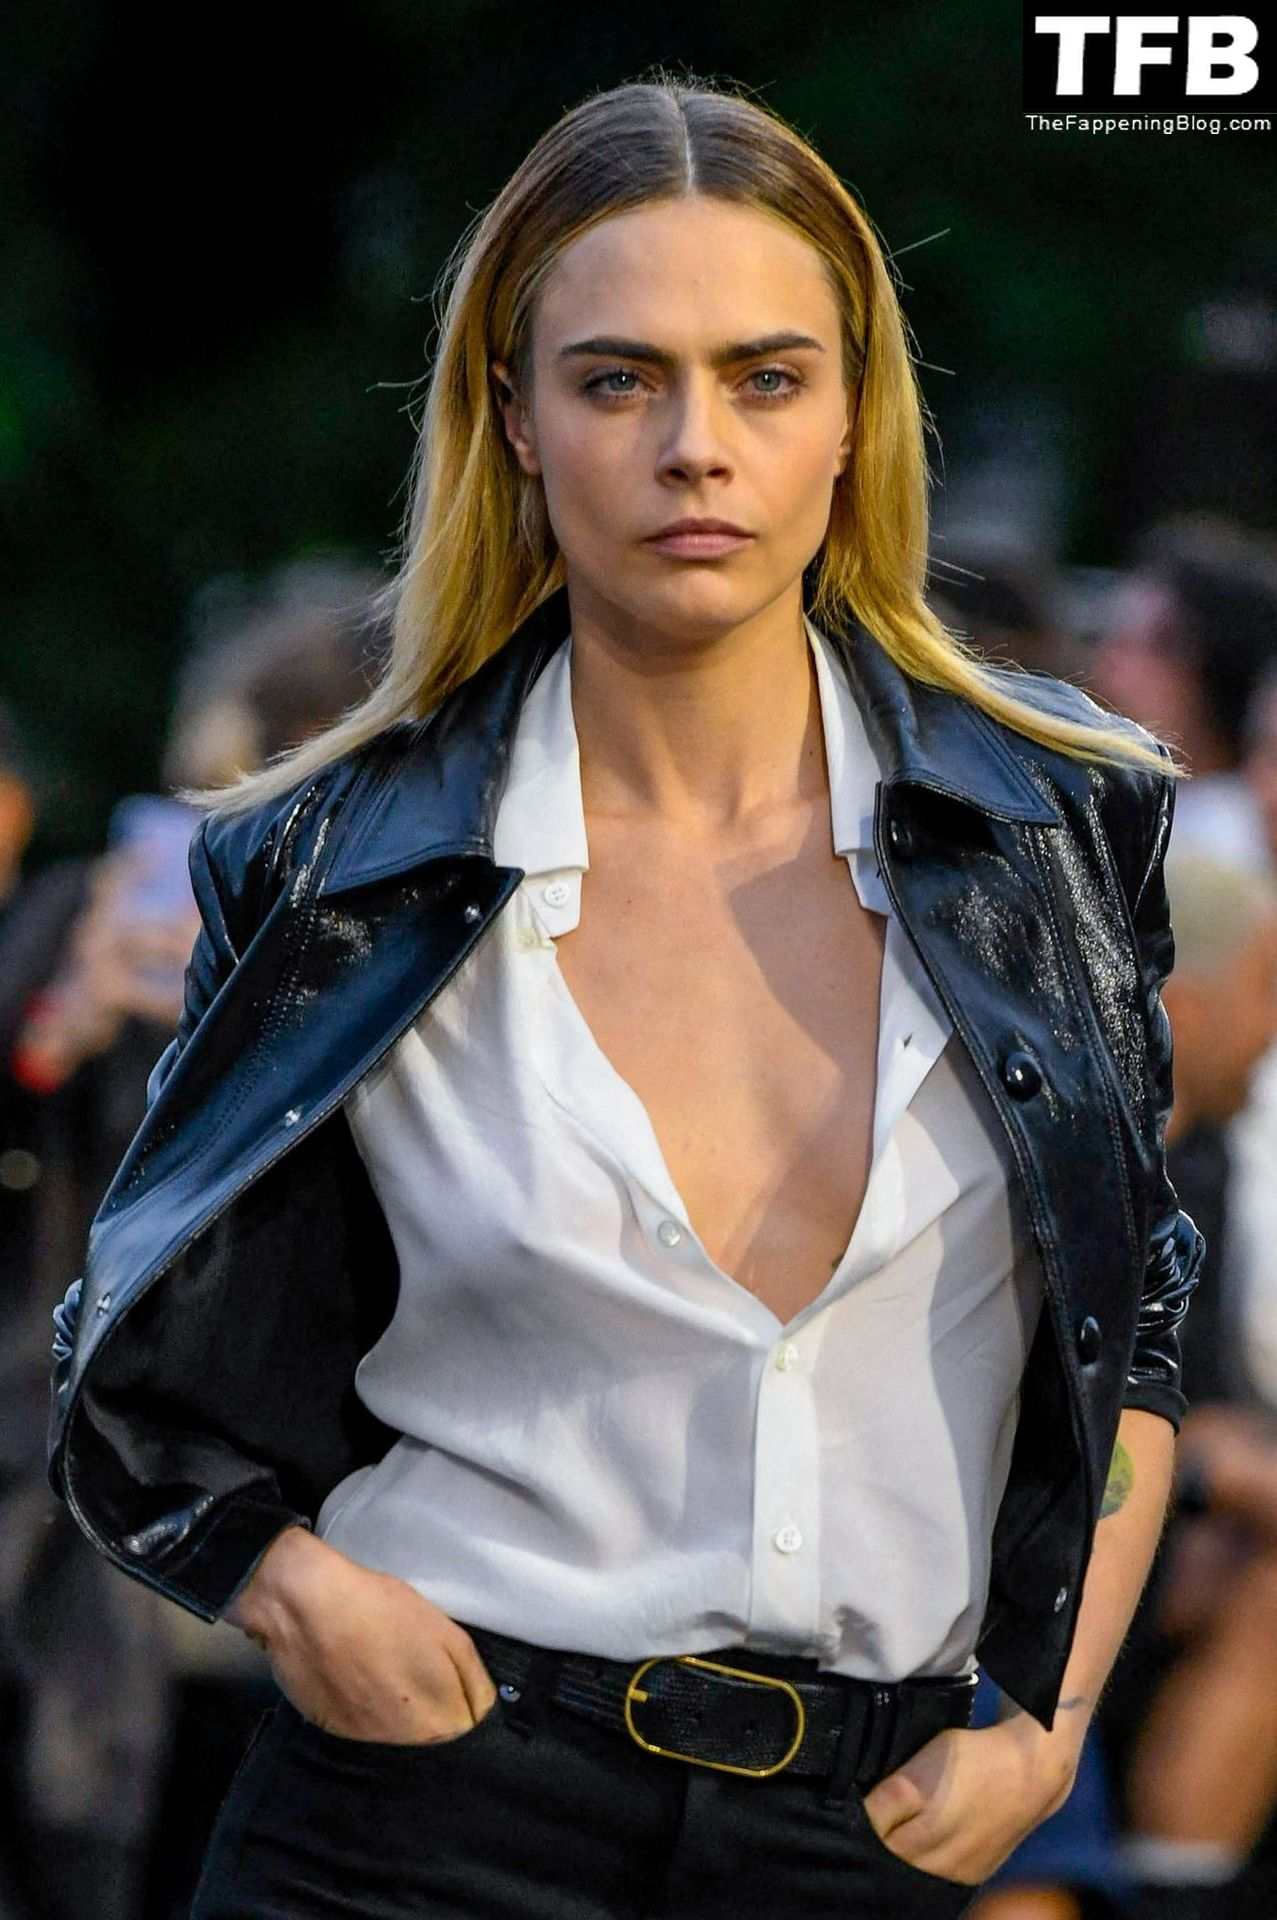 Cara-Delevingne-Sexy-The-Fappening-Blog-17.jpg